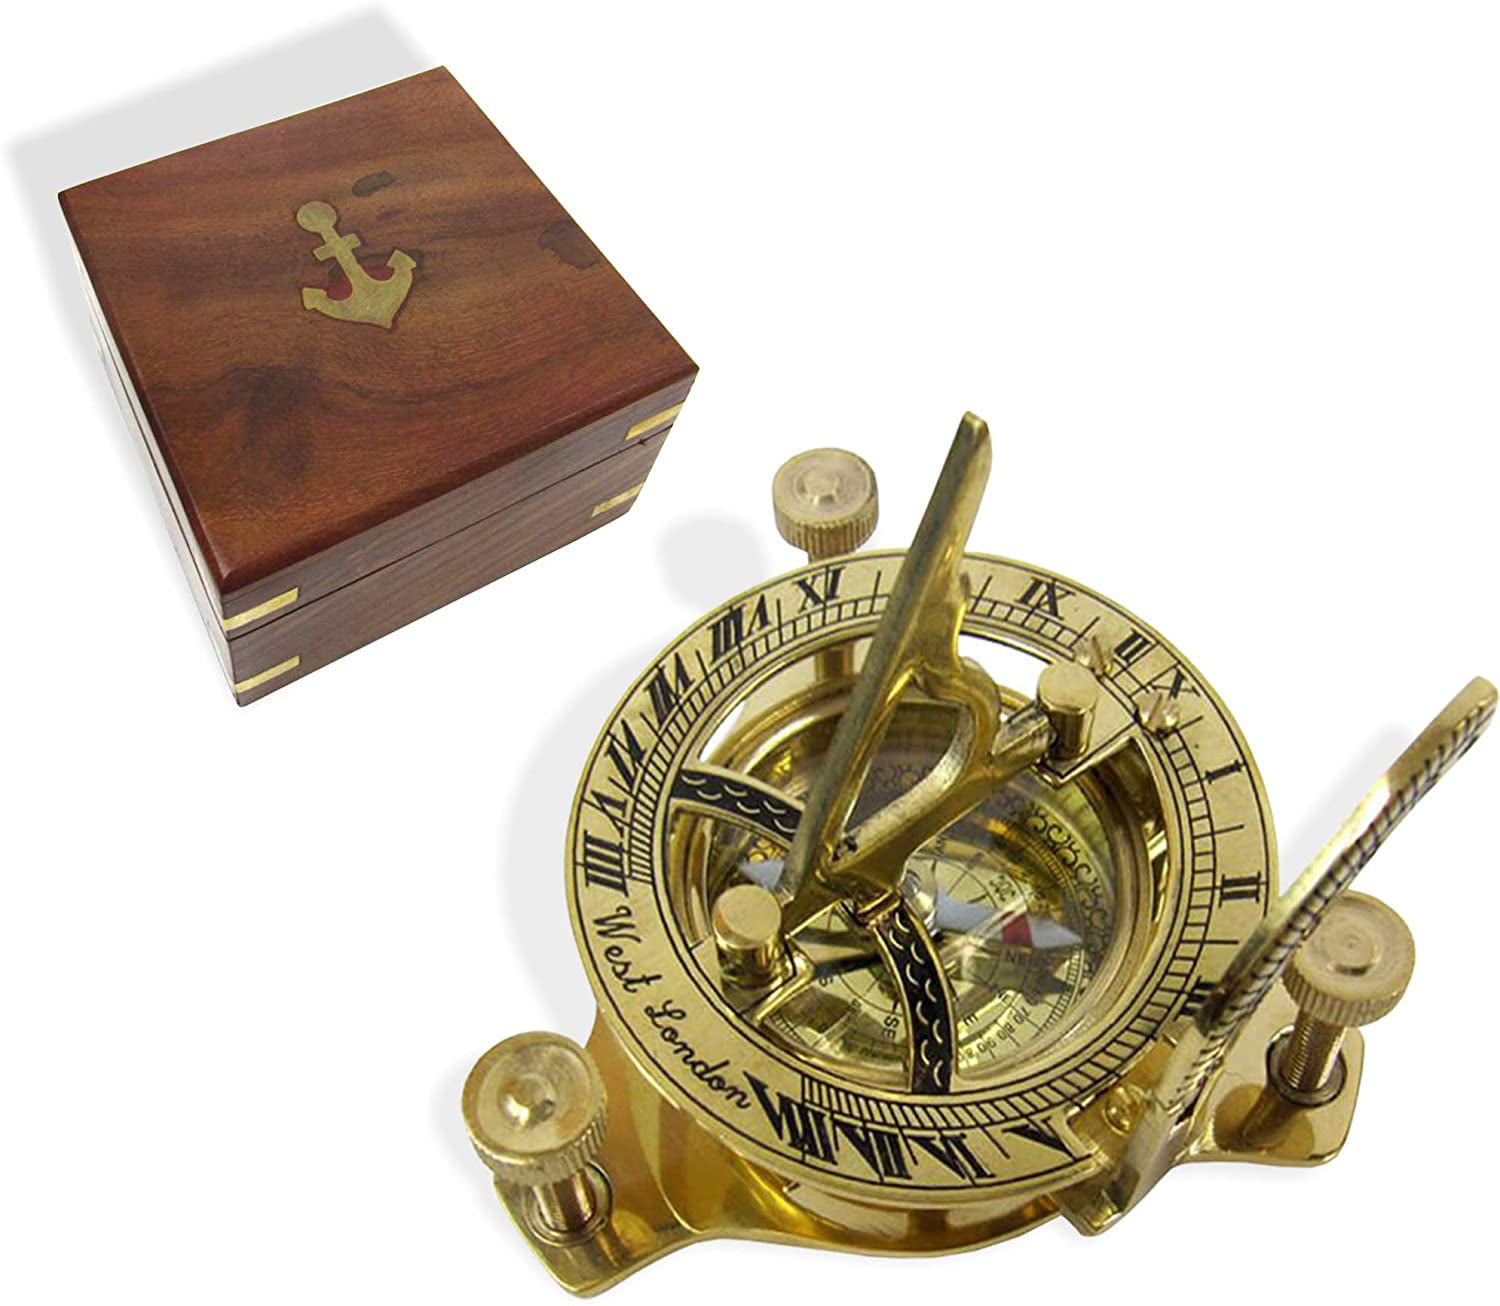 Lot of 5 World Brass Magnetic Nautical Compass in wooden Box Christmas Gift 